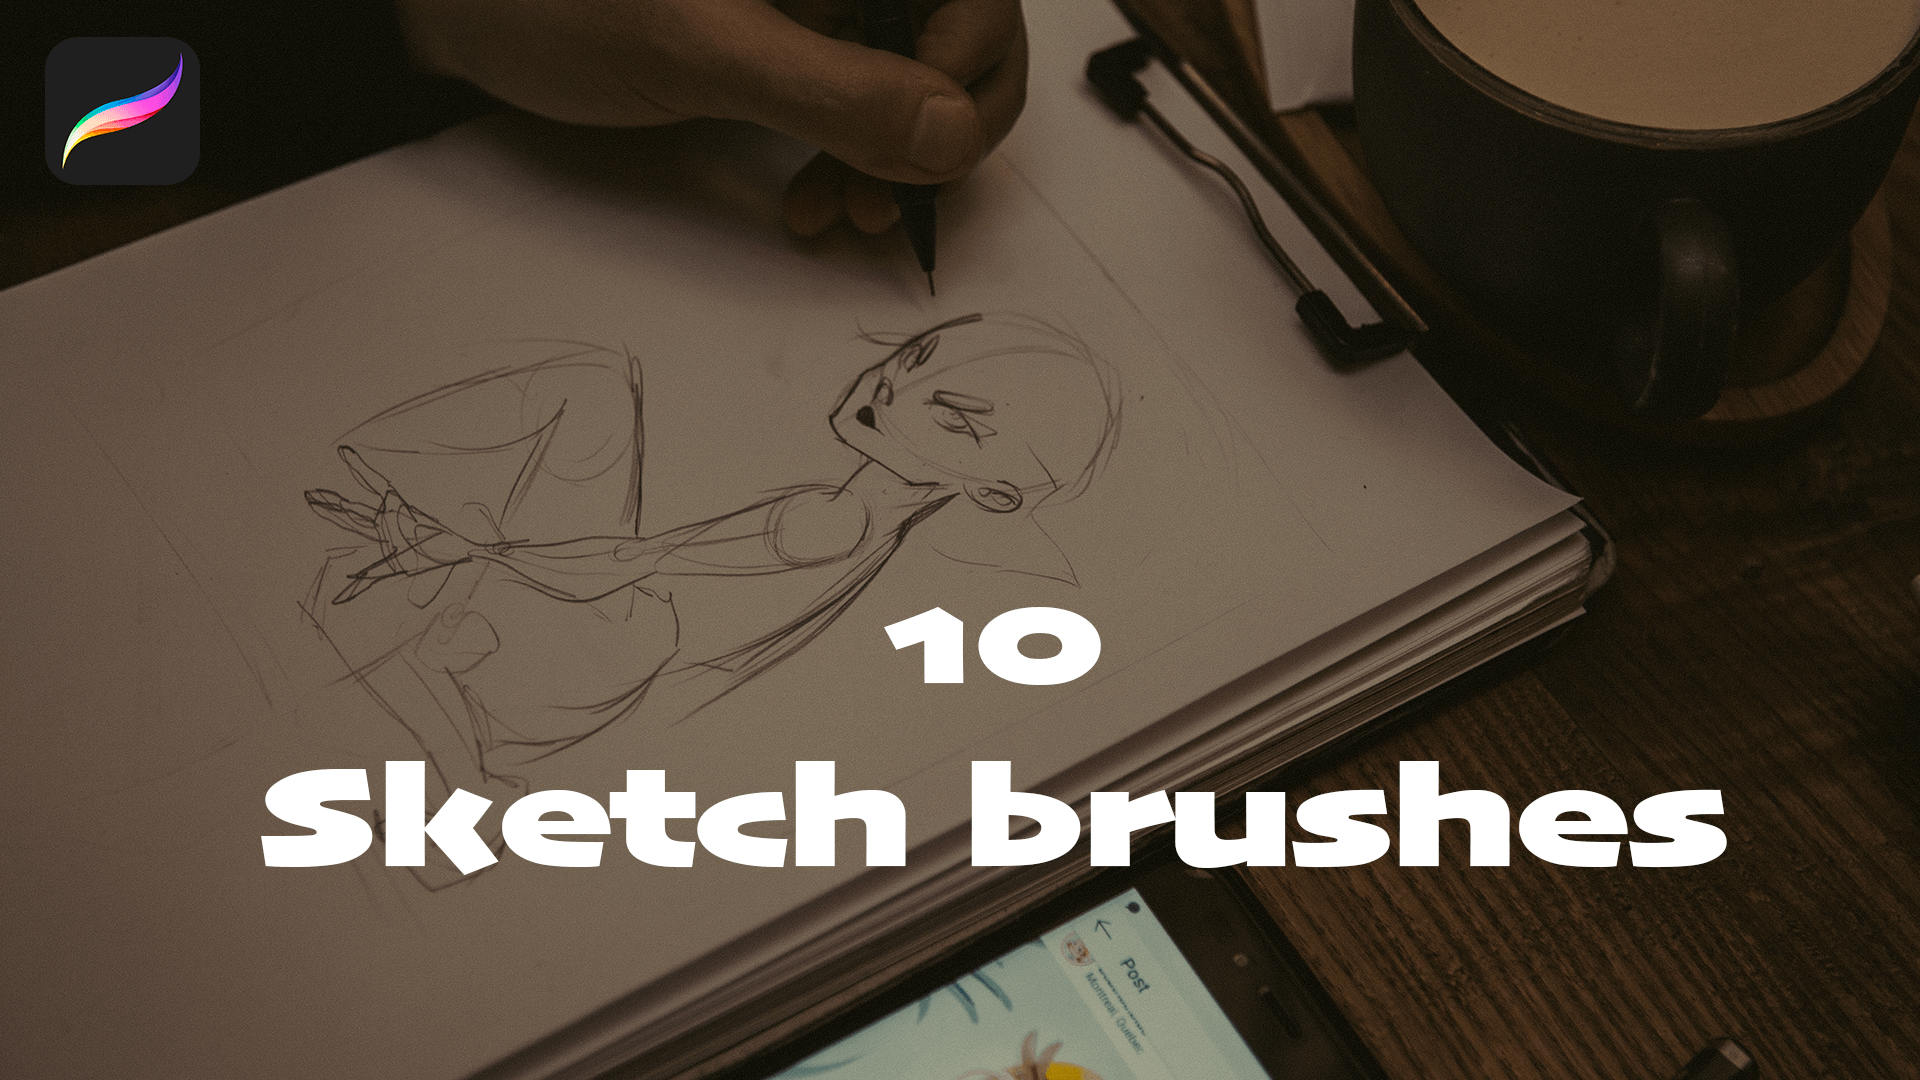 10 FREE SKETCH brushes for procreate - Free Brushes for Procreate